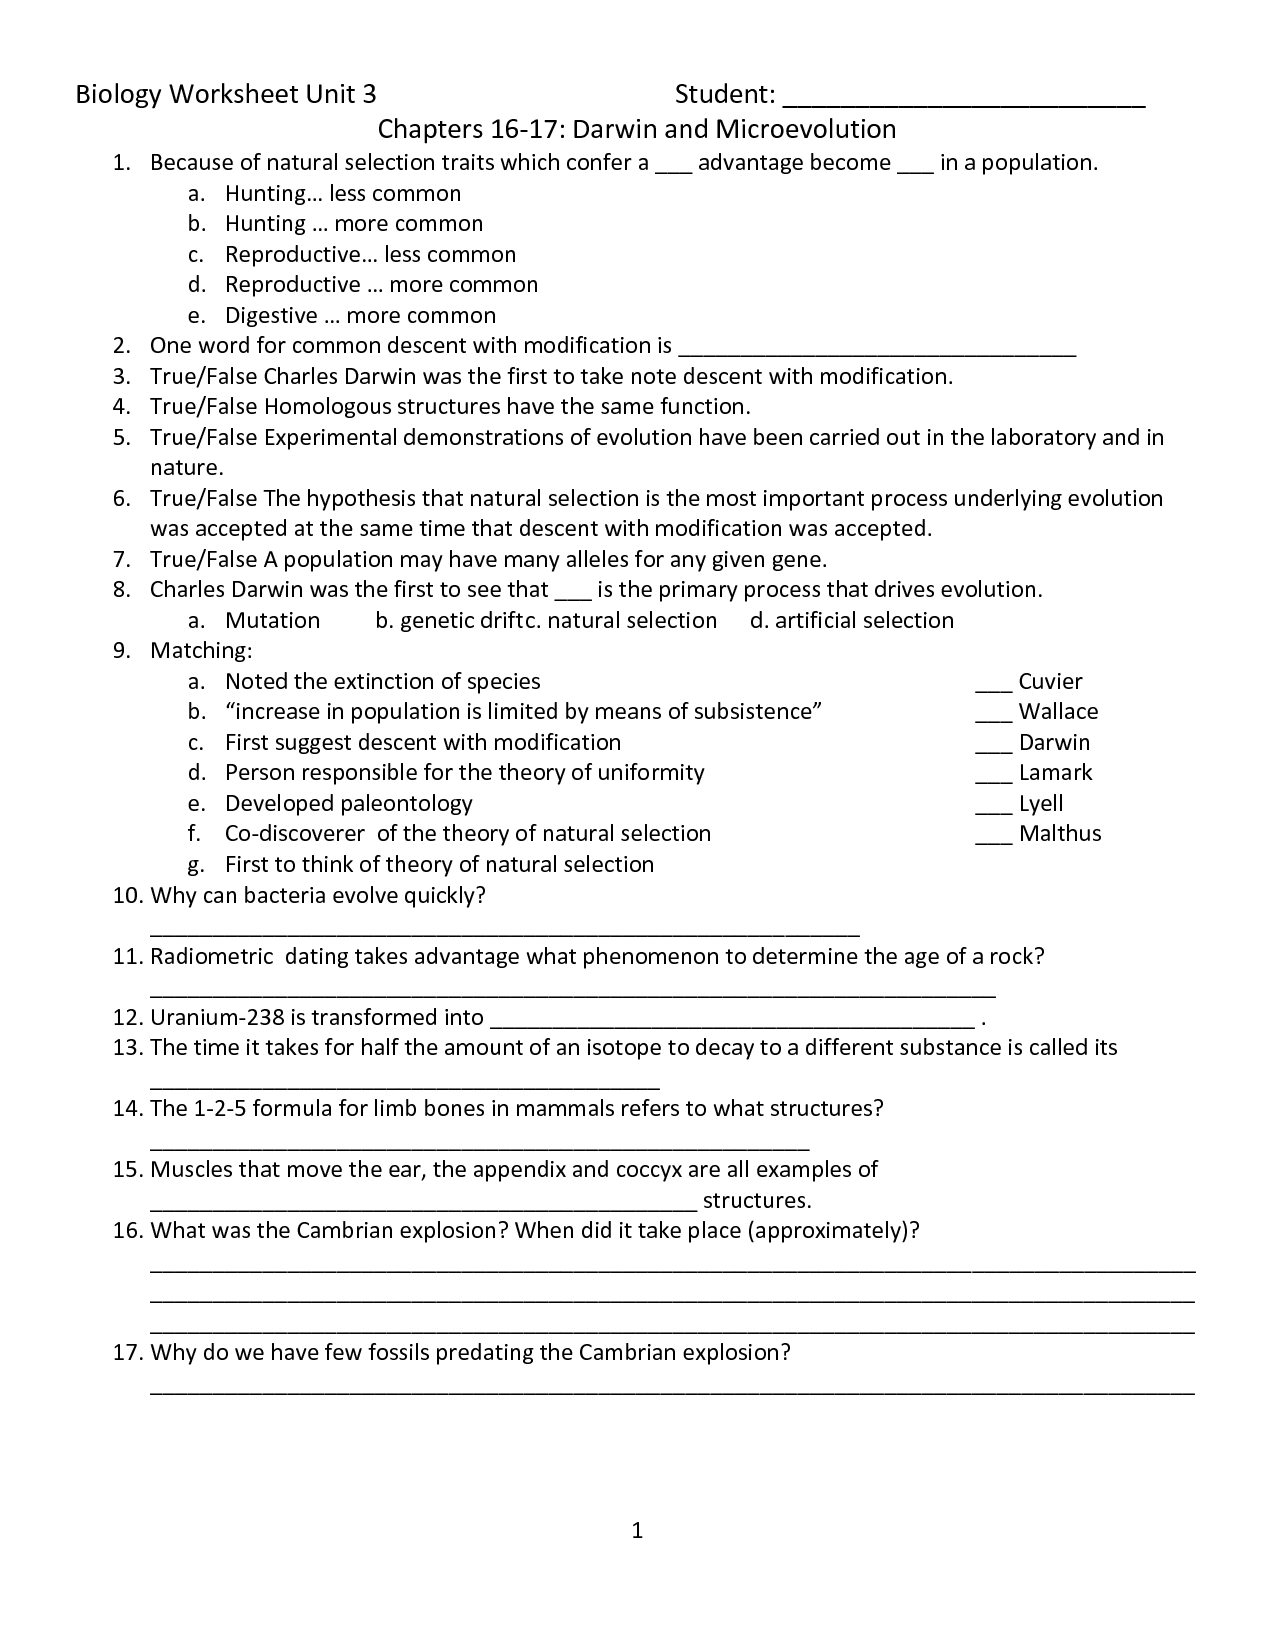 Darwins Natural Selection Worksheet Answers 13 Best Images Of What Darwin Never Knew Worksheet 